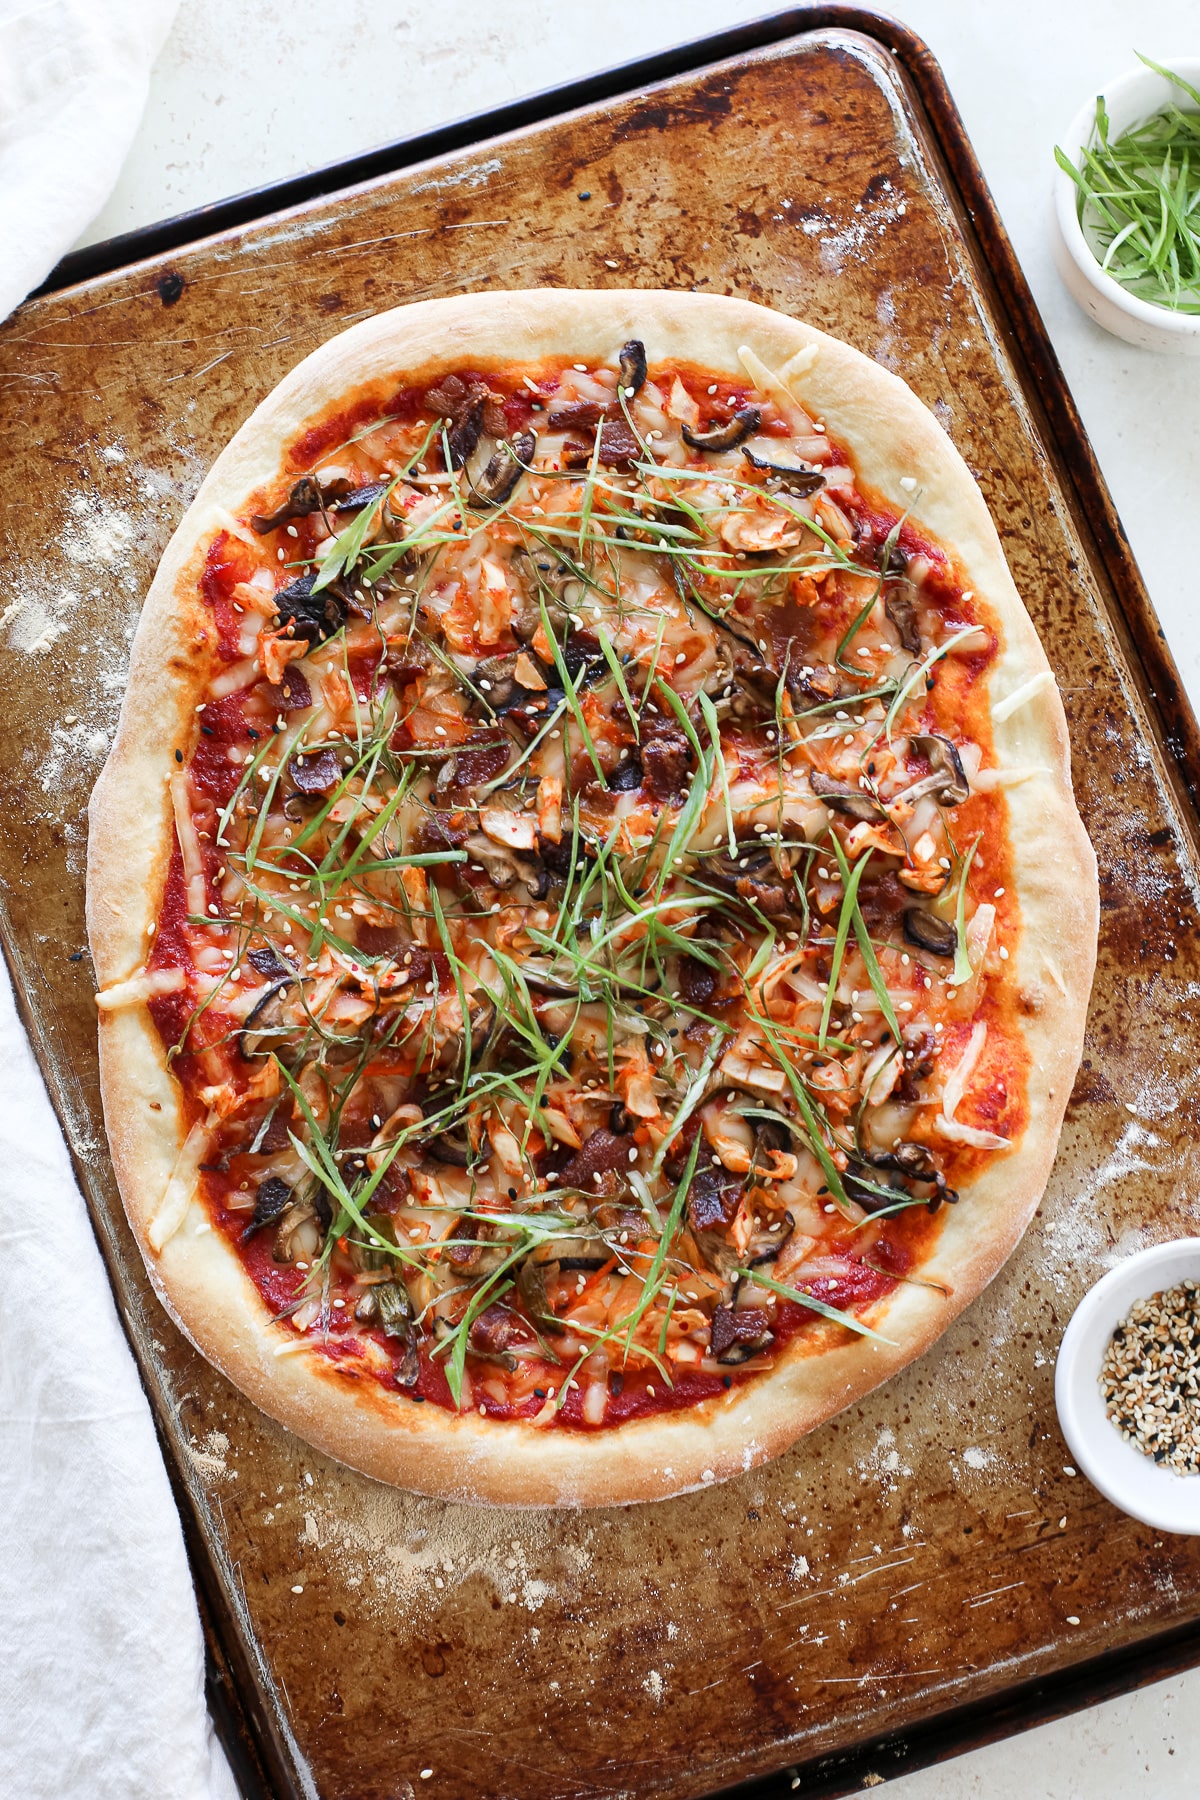 A large pizza with kimchi, bacon, green onion, mushrooms, and a gochujang sauce.